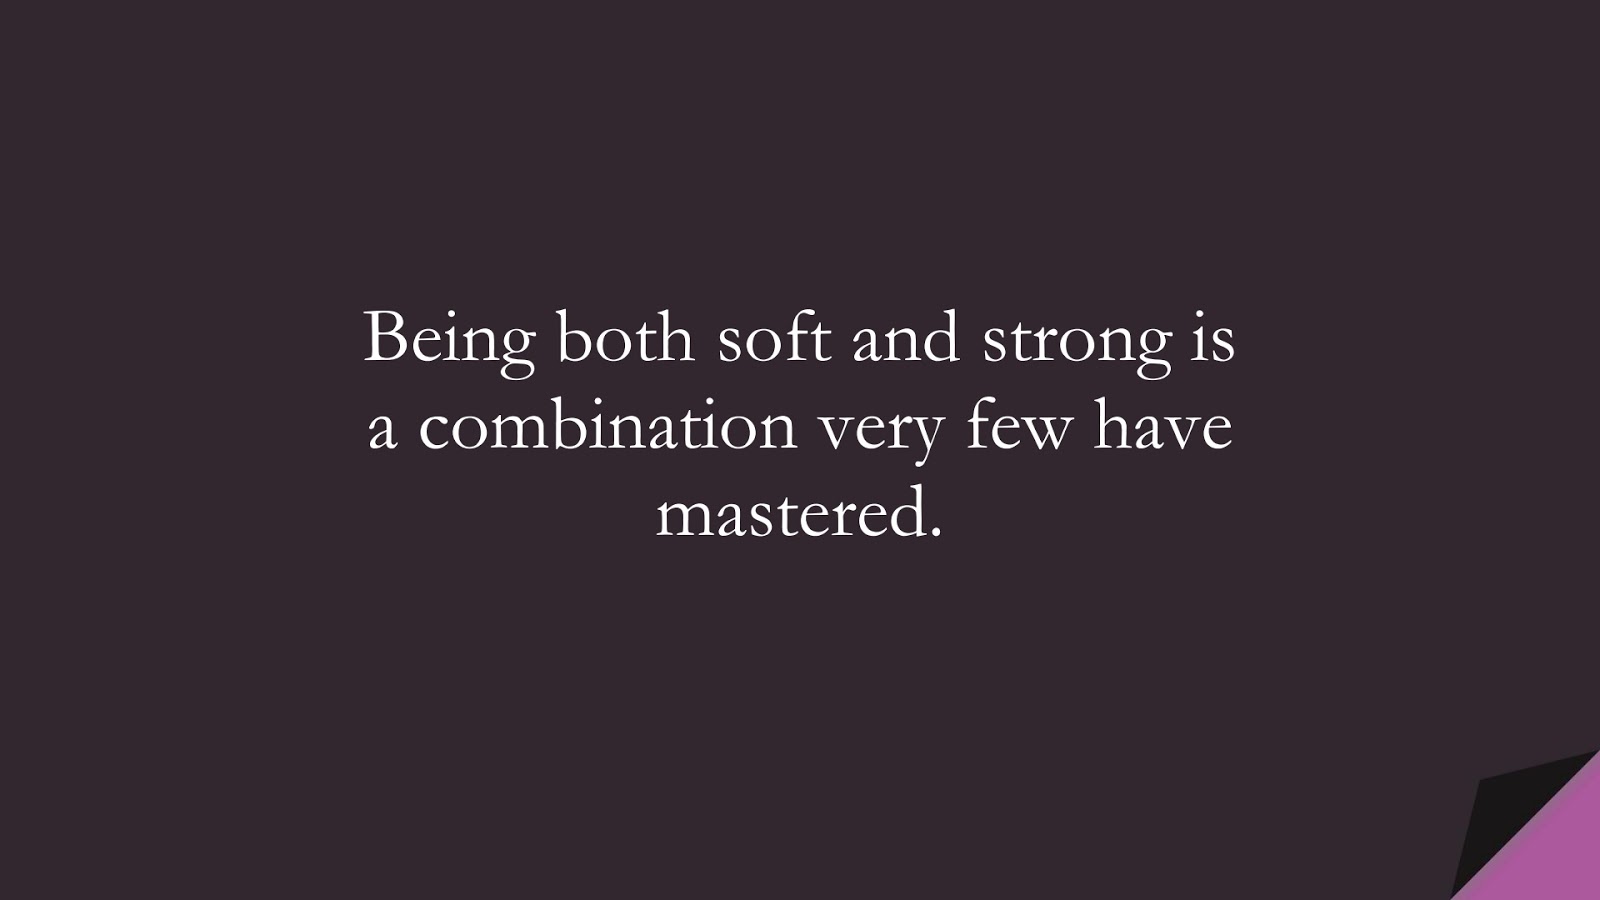 Being both soft and strong is a combination very few have mastered.FALSE